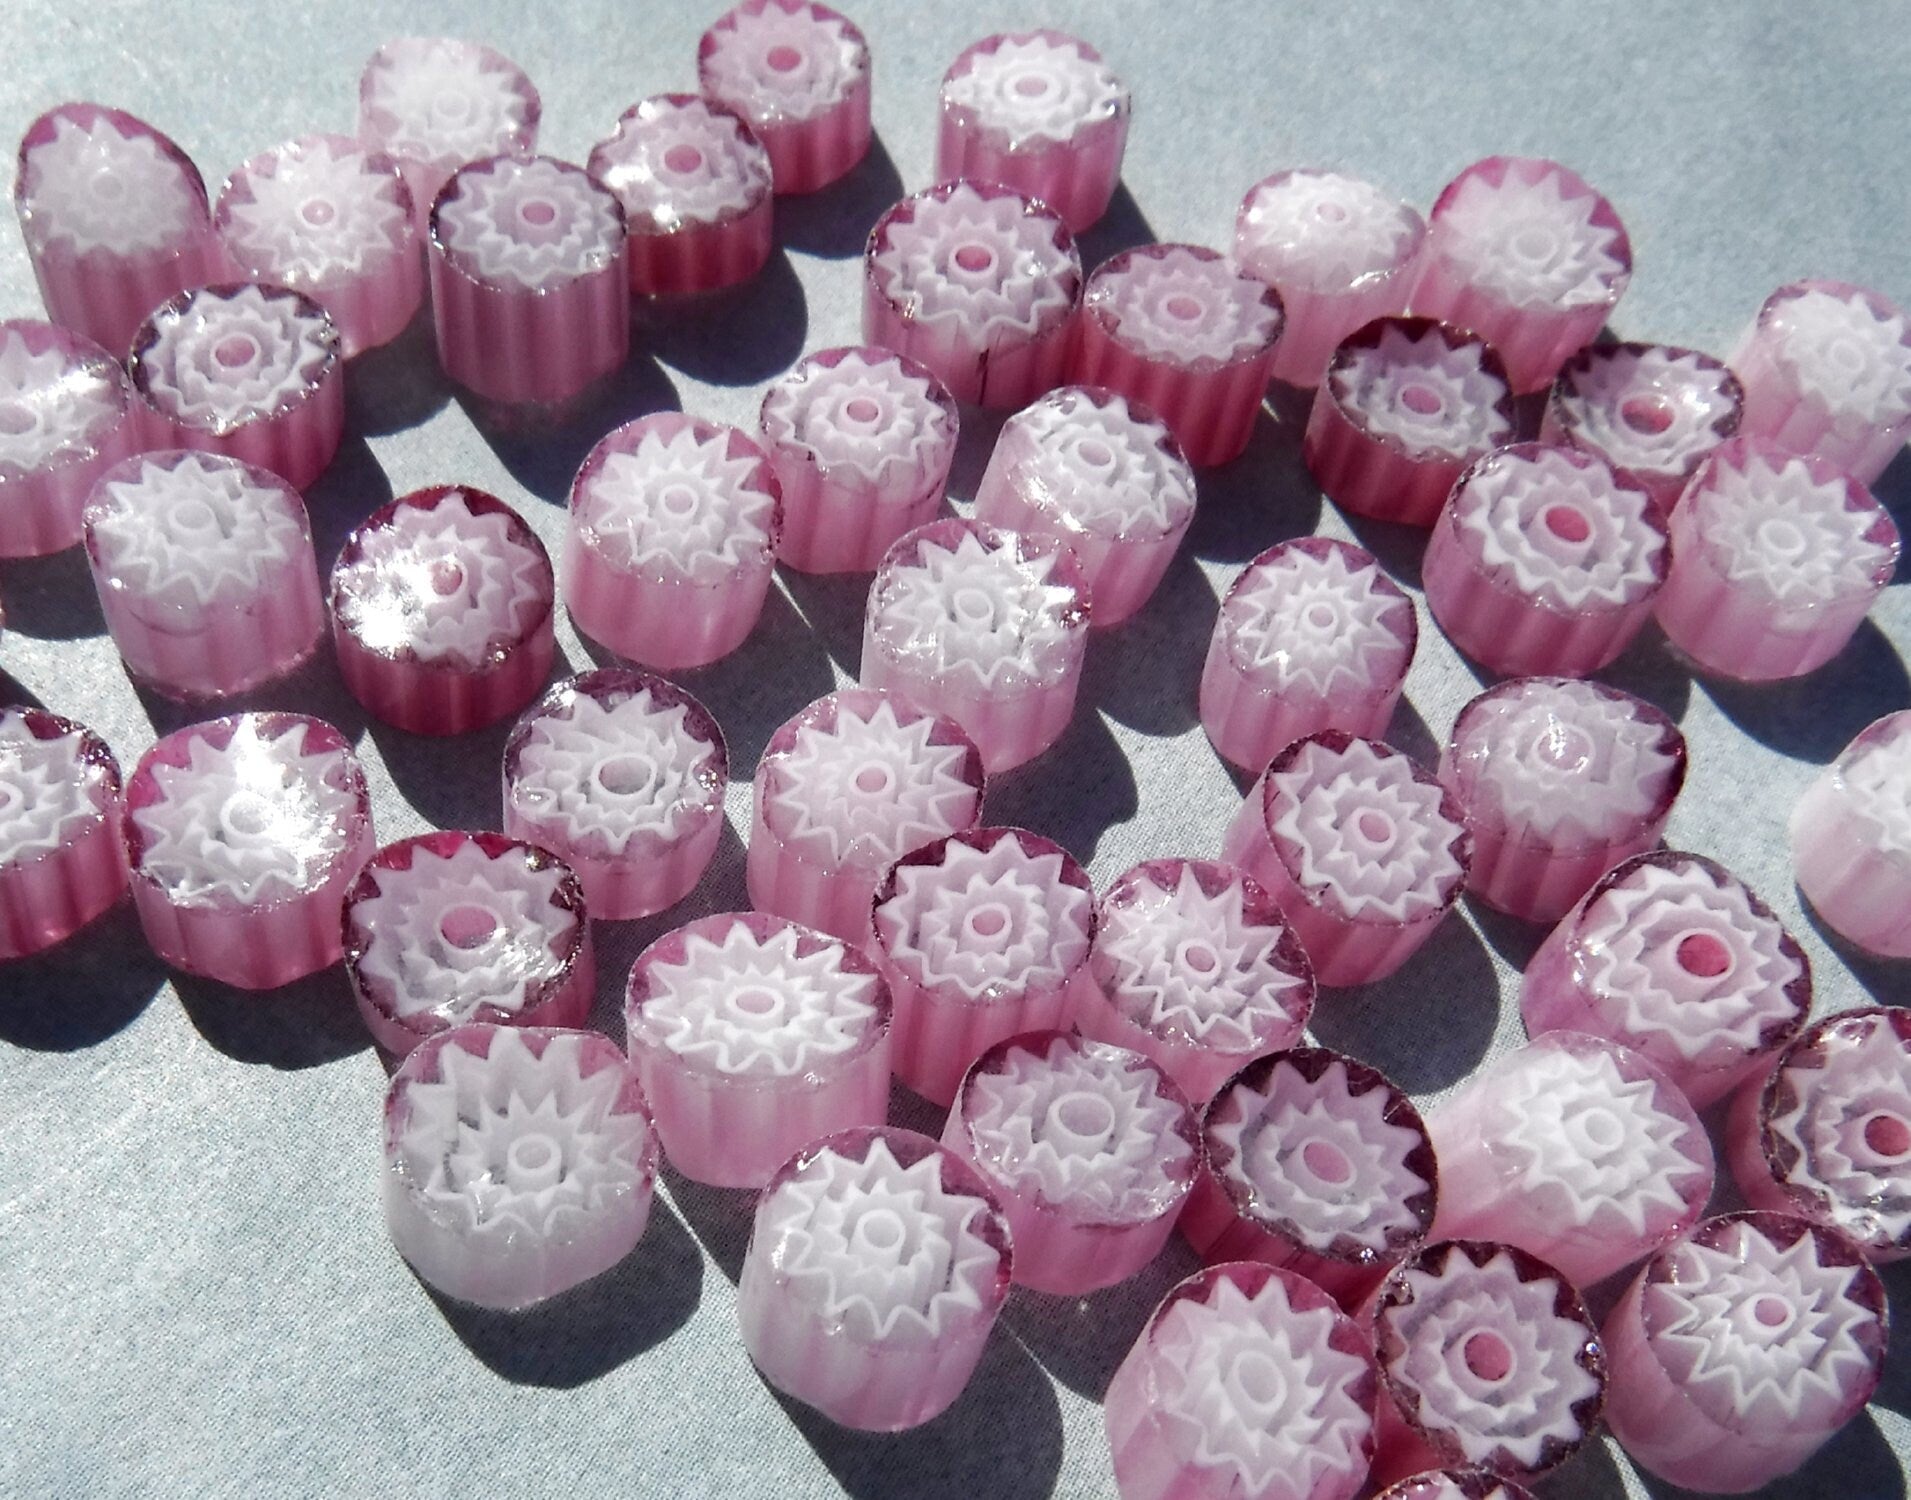 White Flowers in Pink Millefiori - 25 grams - Unique Mosaic Glass Tiles - Floral Pattern